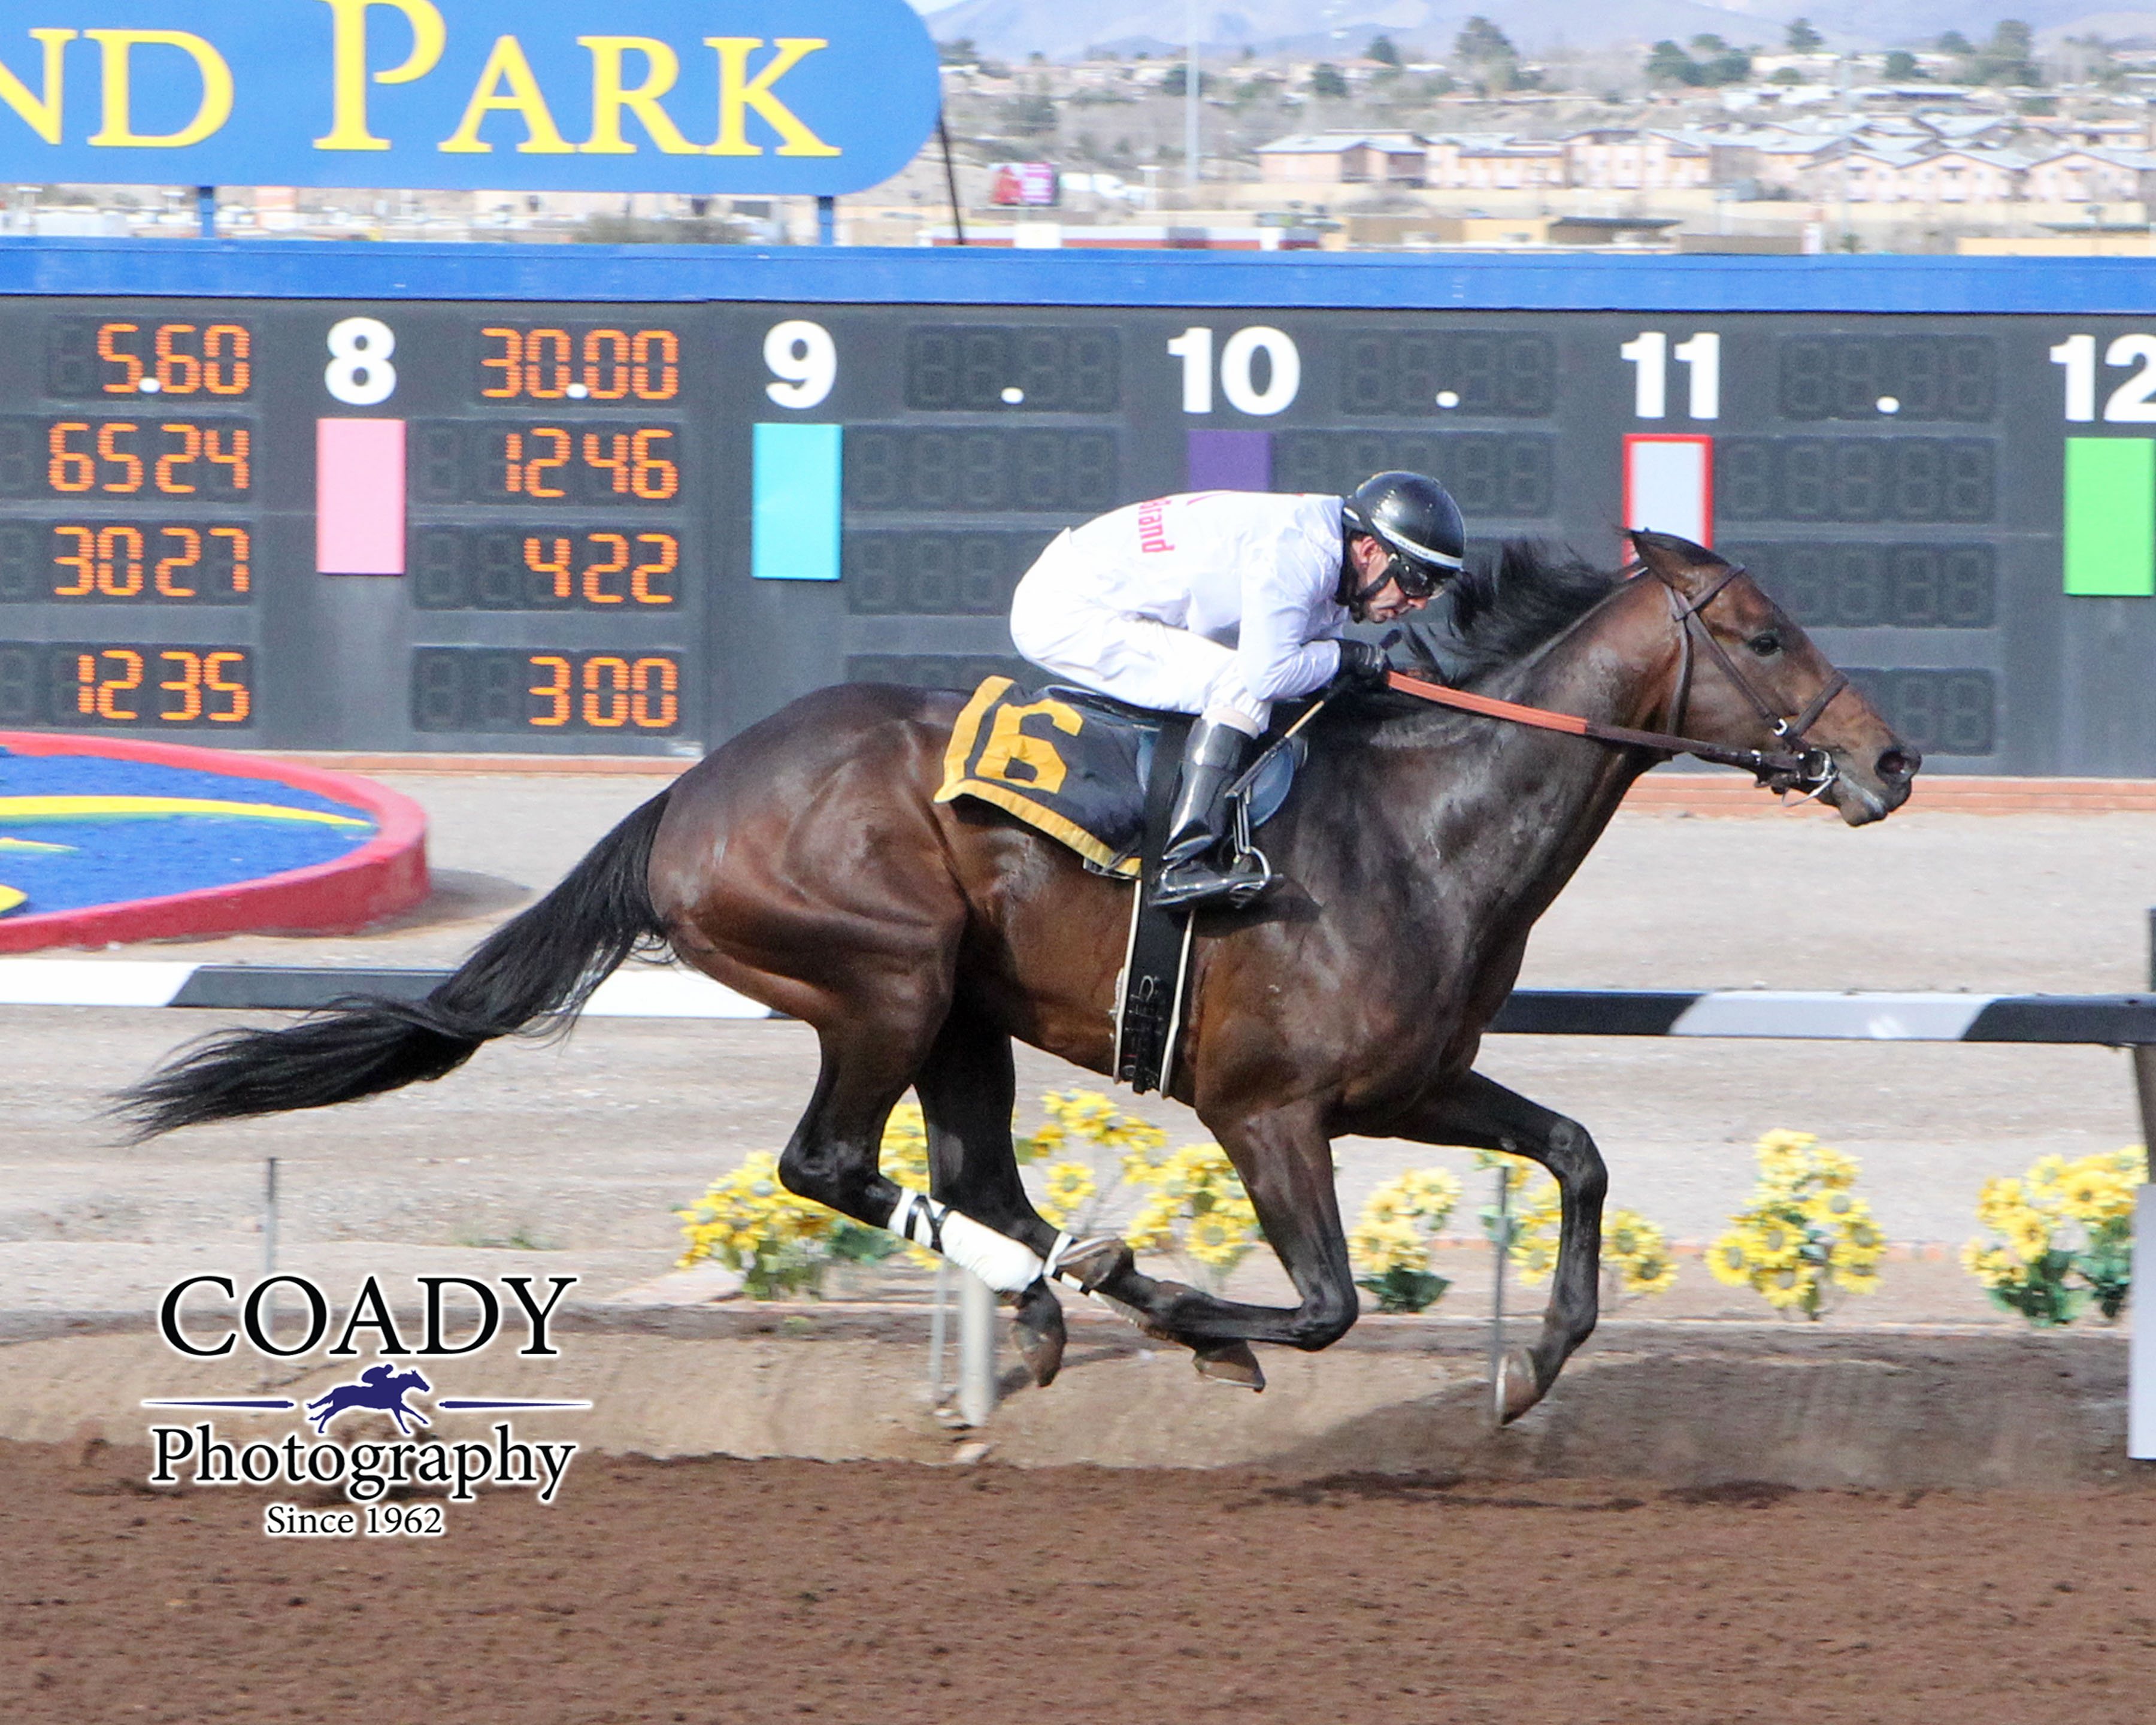 American Dubai, who was on the Derby trail as a 3 year old in 2016, captured his first race of 2017 Feb. 14 at Sunland. Photo courtesy of Coady Photography. 